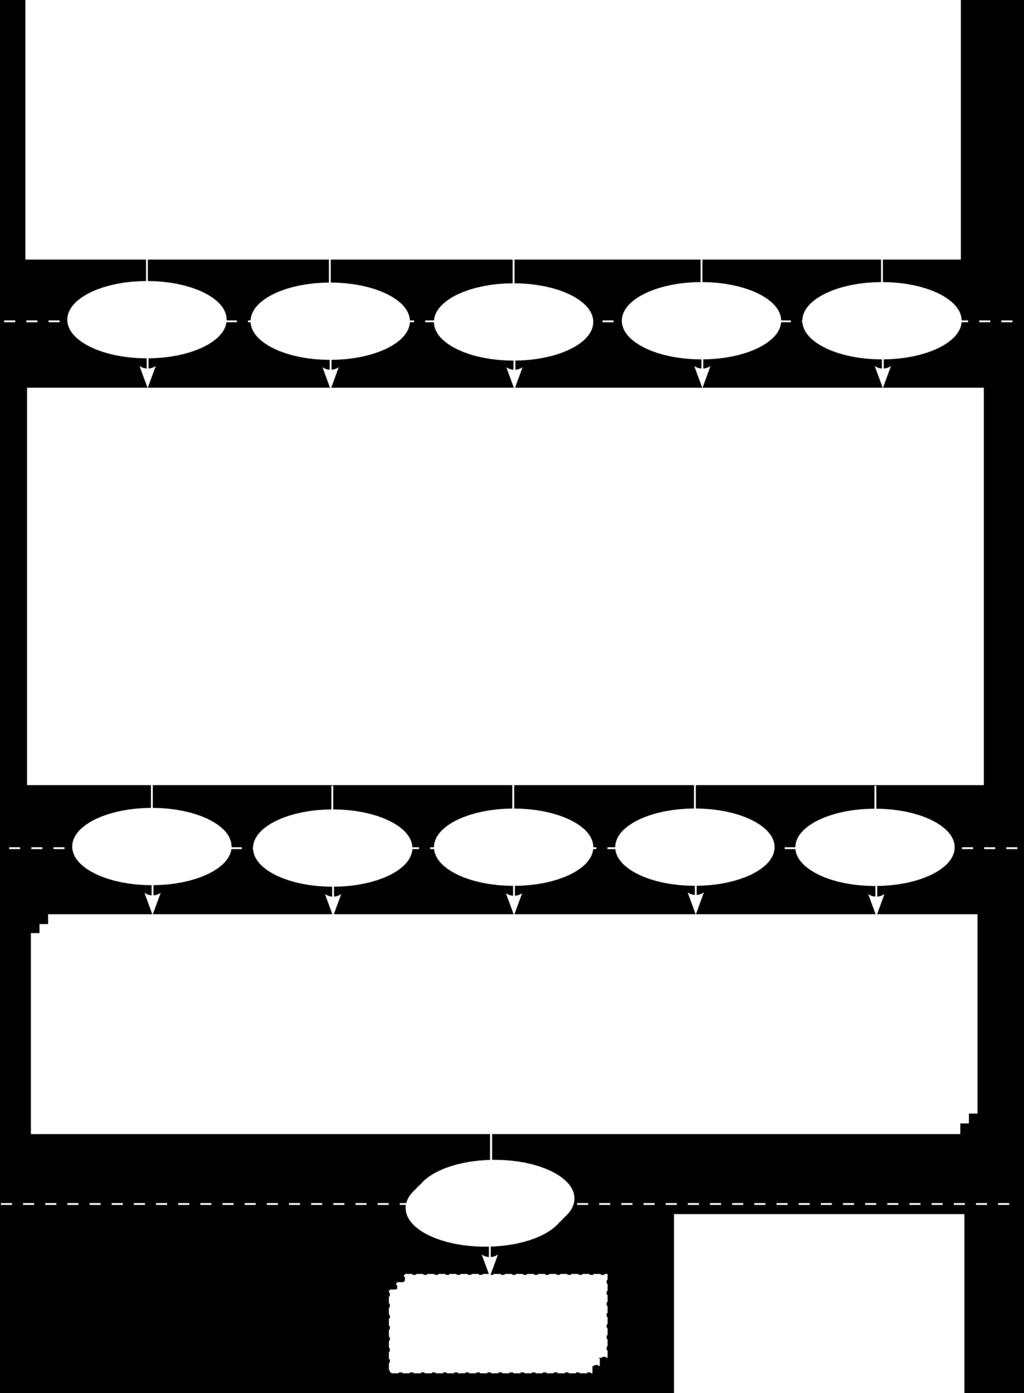 Fig. 5. Actuators, behaviors, and mutual inhibitions within the behavioral hierarchy. Upper layer behaviors can configure lower layer behaviors by manipulating the upper layer actuators.